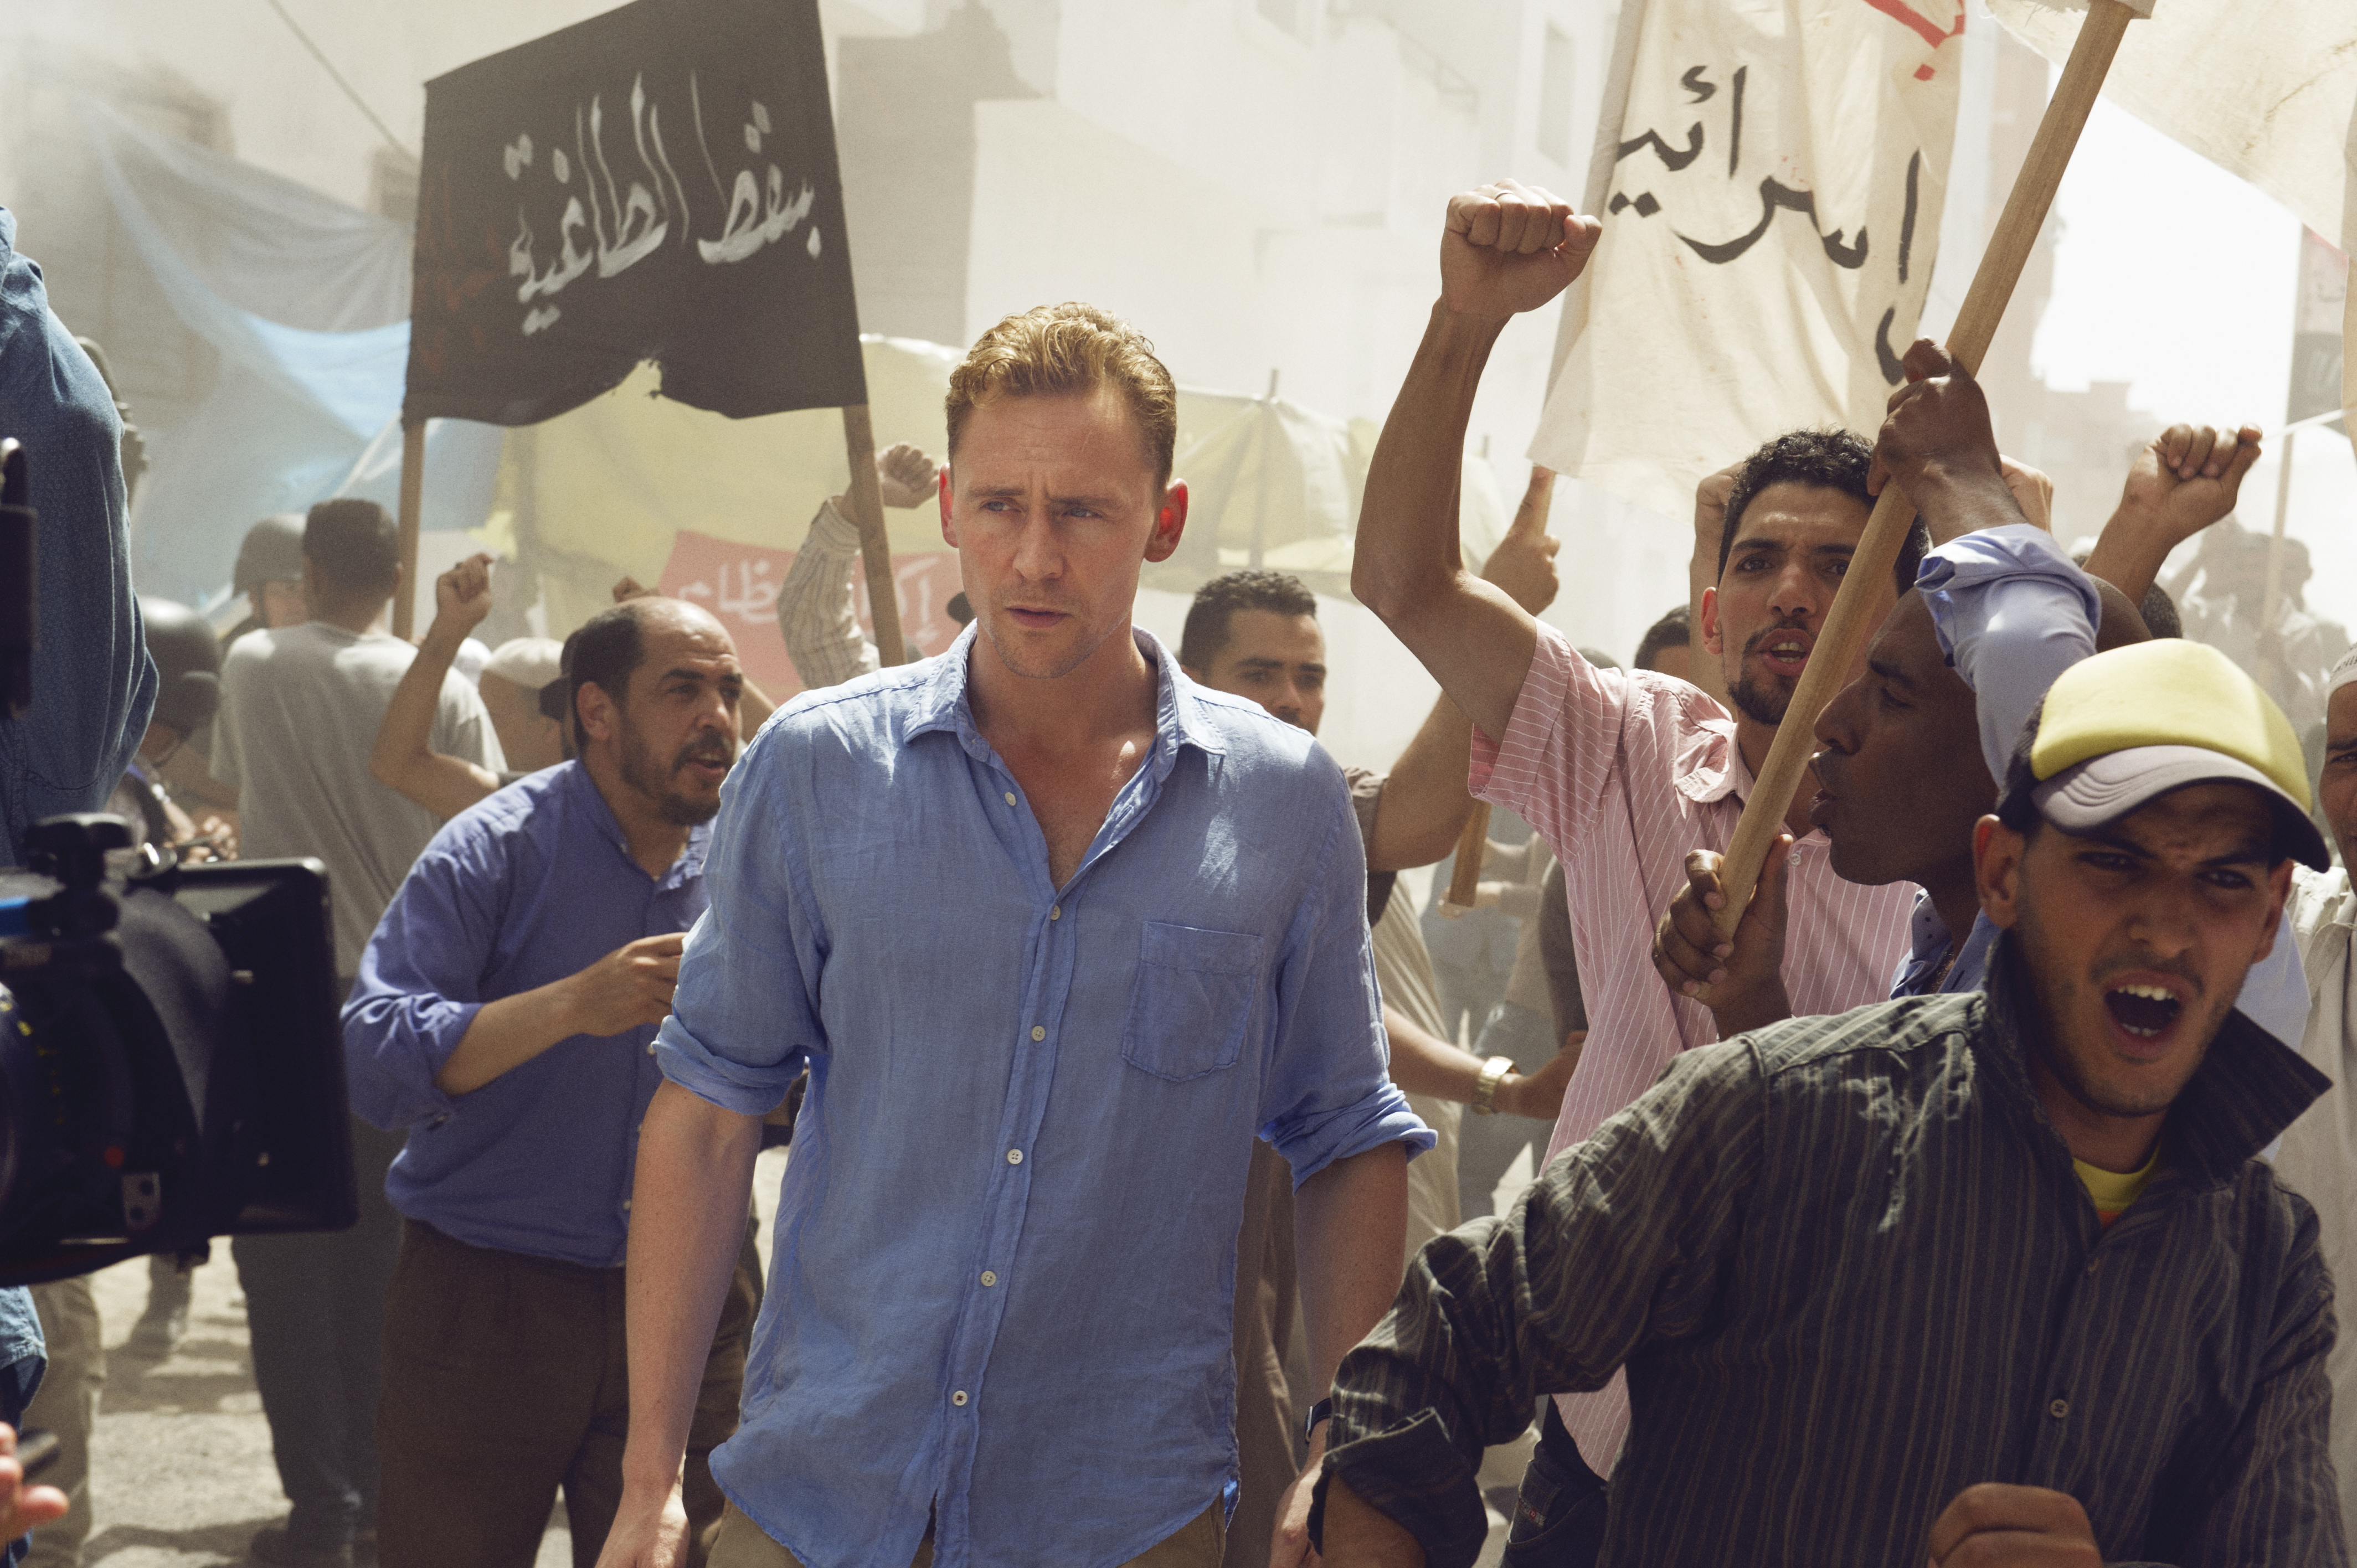 The Night Manager Pics, TV Show Collection